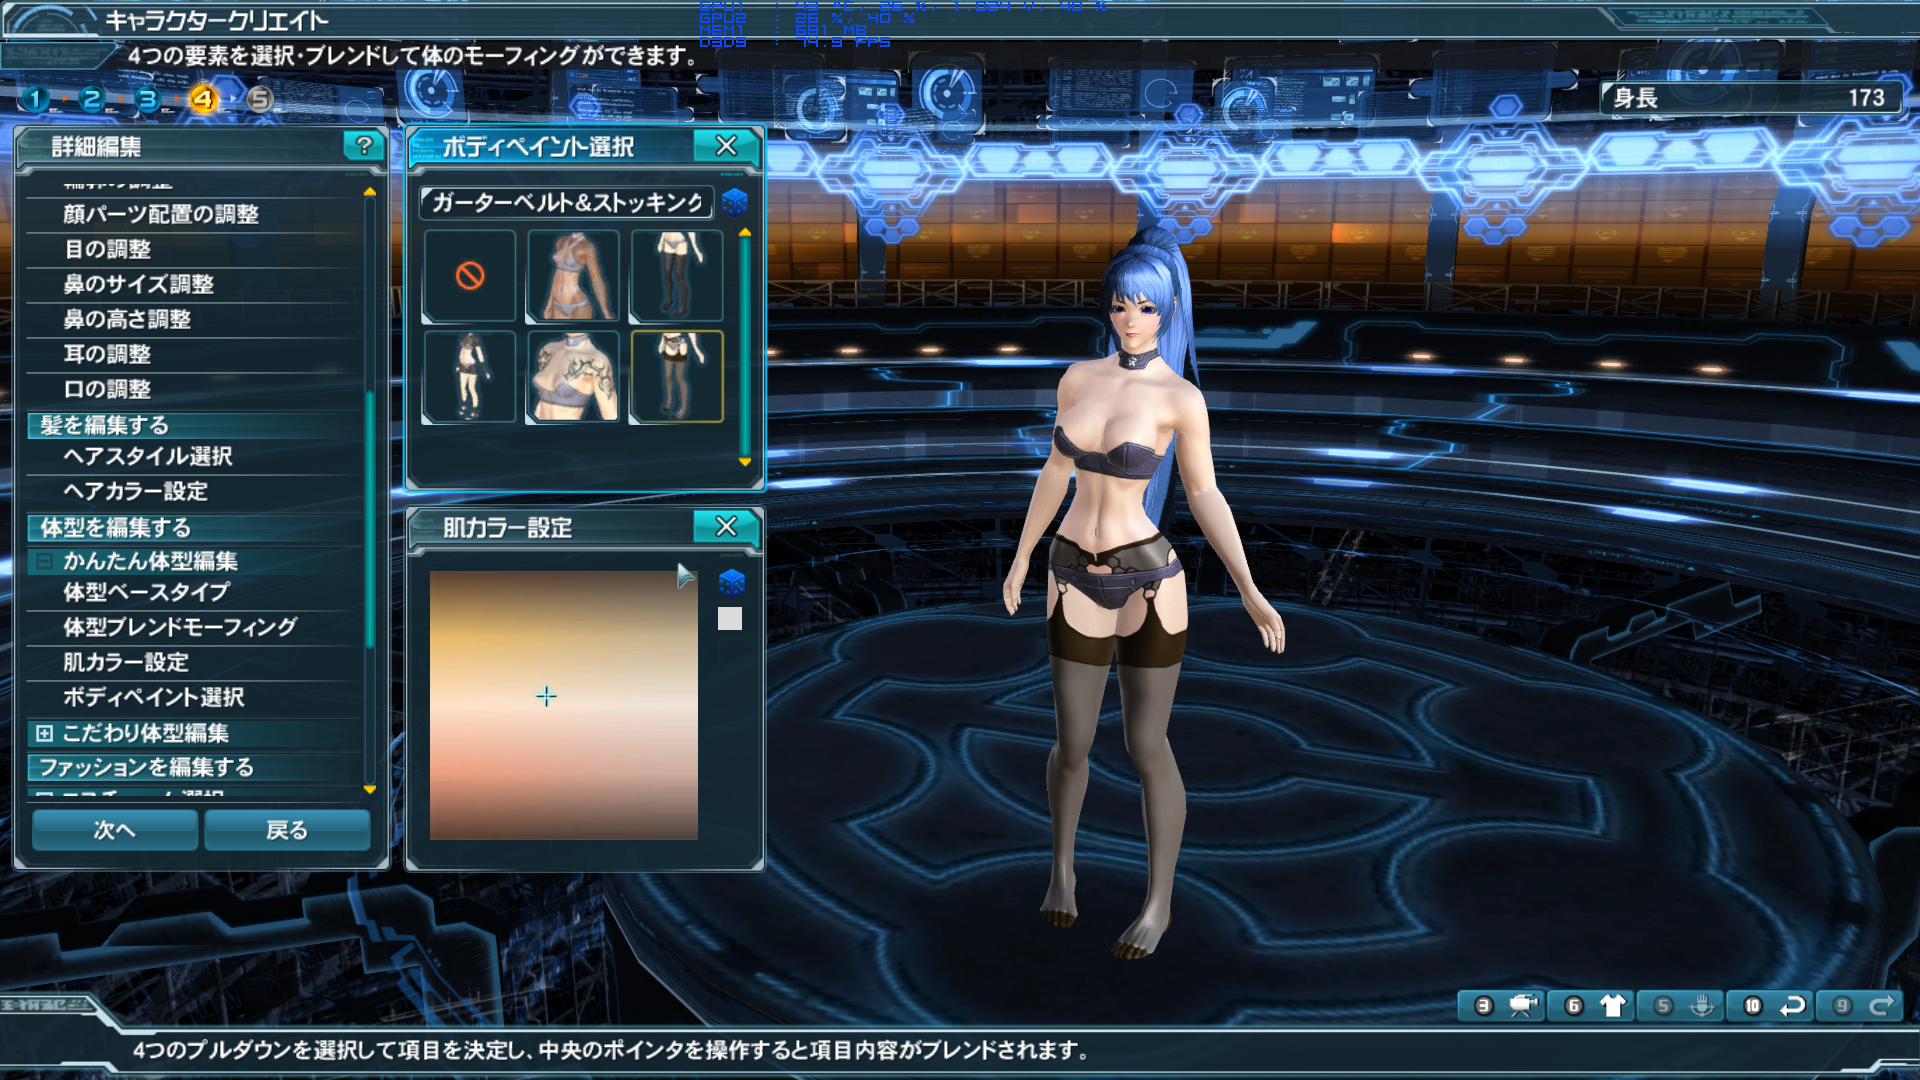 pso2_2012_04_06_20_18_46_845.png